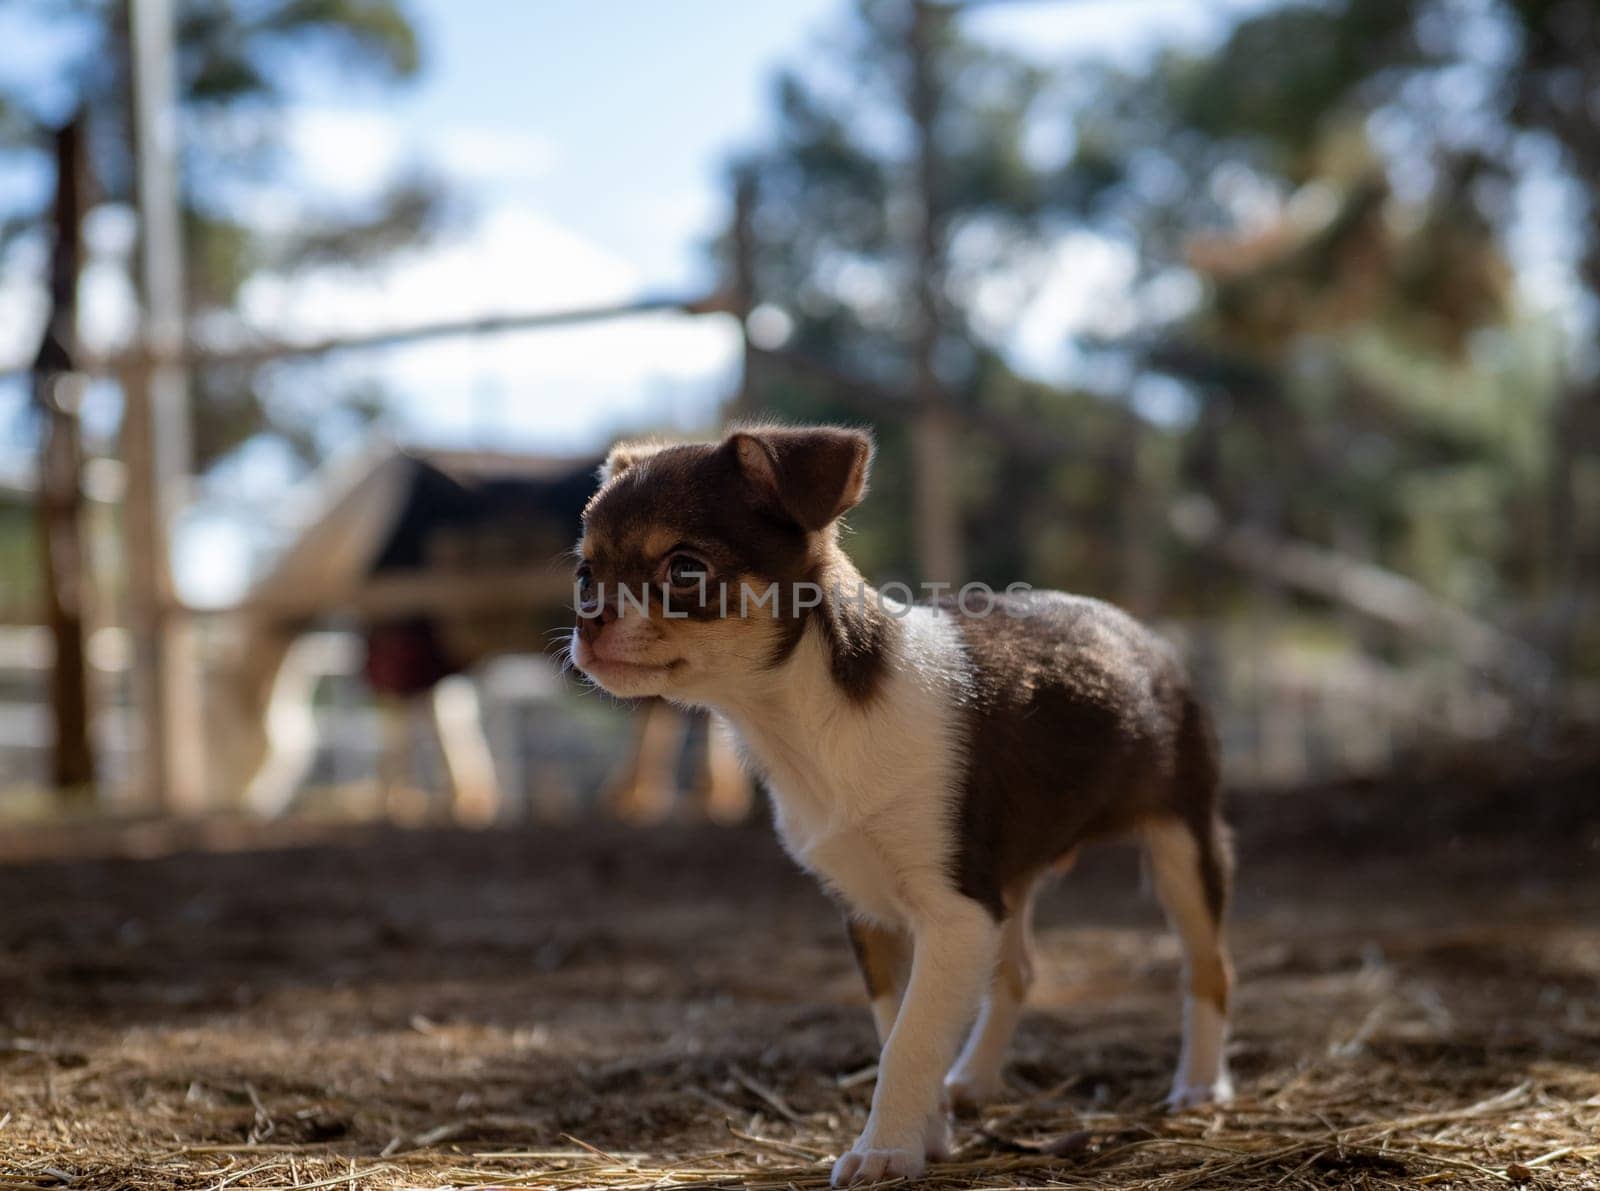 A curious Chihuahua puppy carefully explores a farmyard, with a backdrop of wooden fences and a clear sky above.